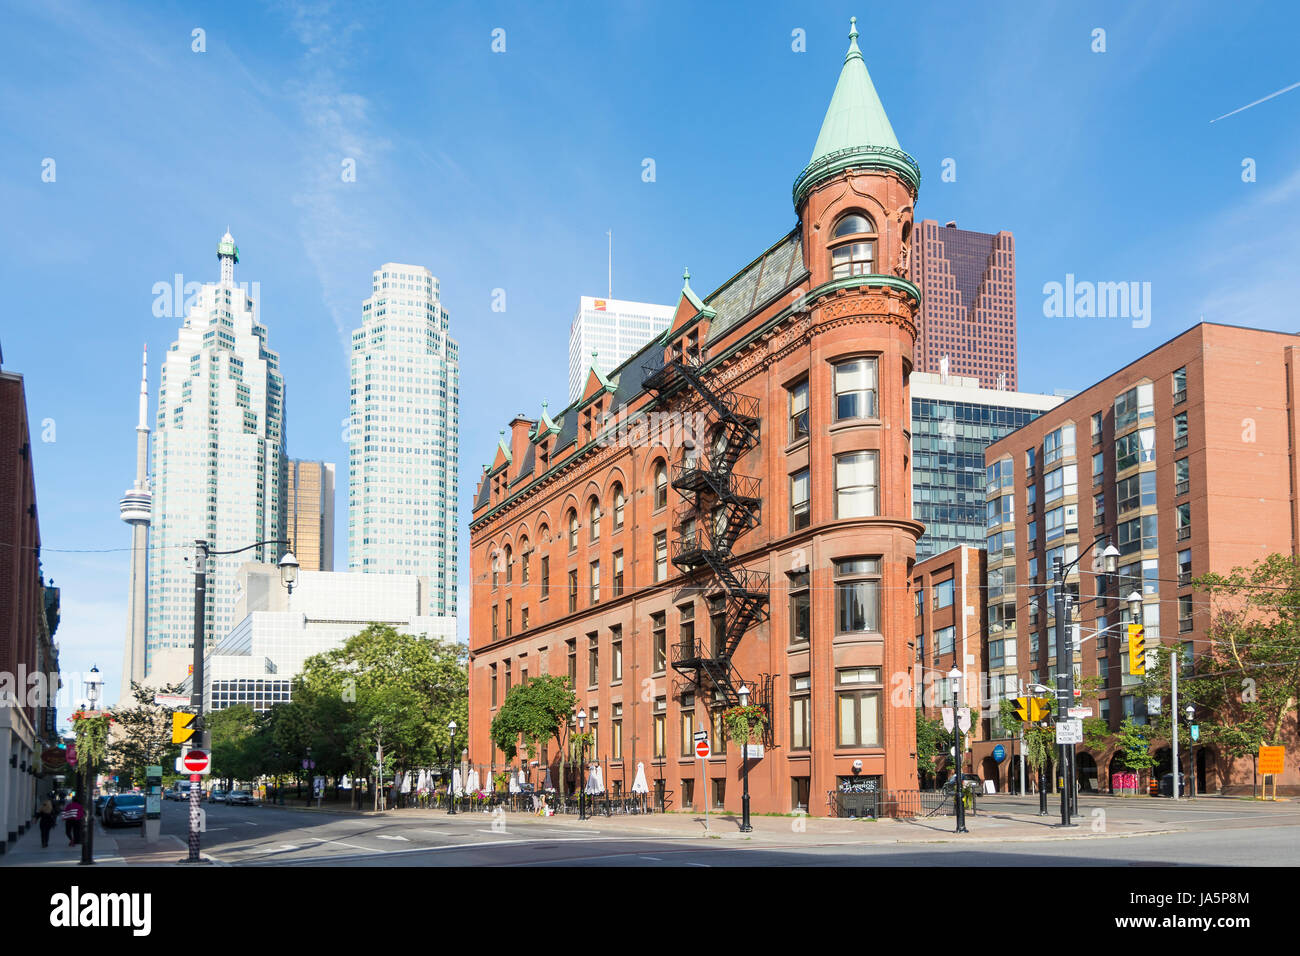 Toronto, Canada - August 2, 2015: view of the Gooderham Building (the Flatiron Building) in downtown Toronto,with some modern buildings and skyscraper Stock Photo